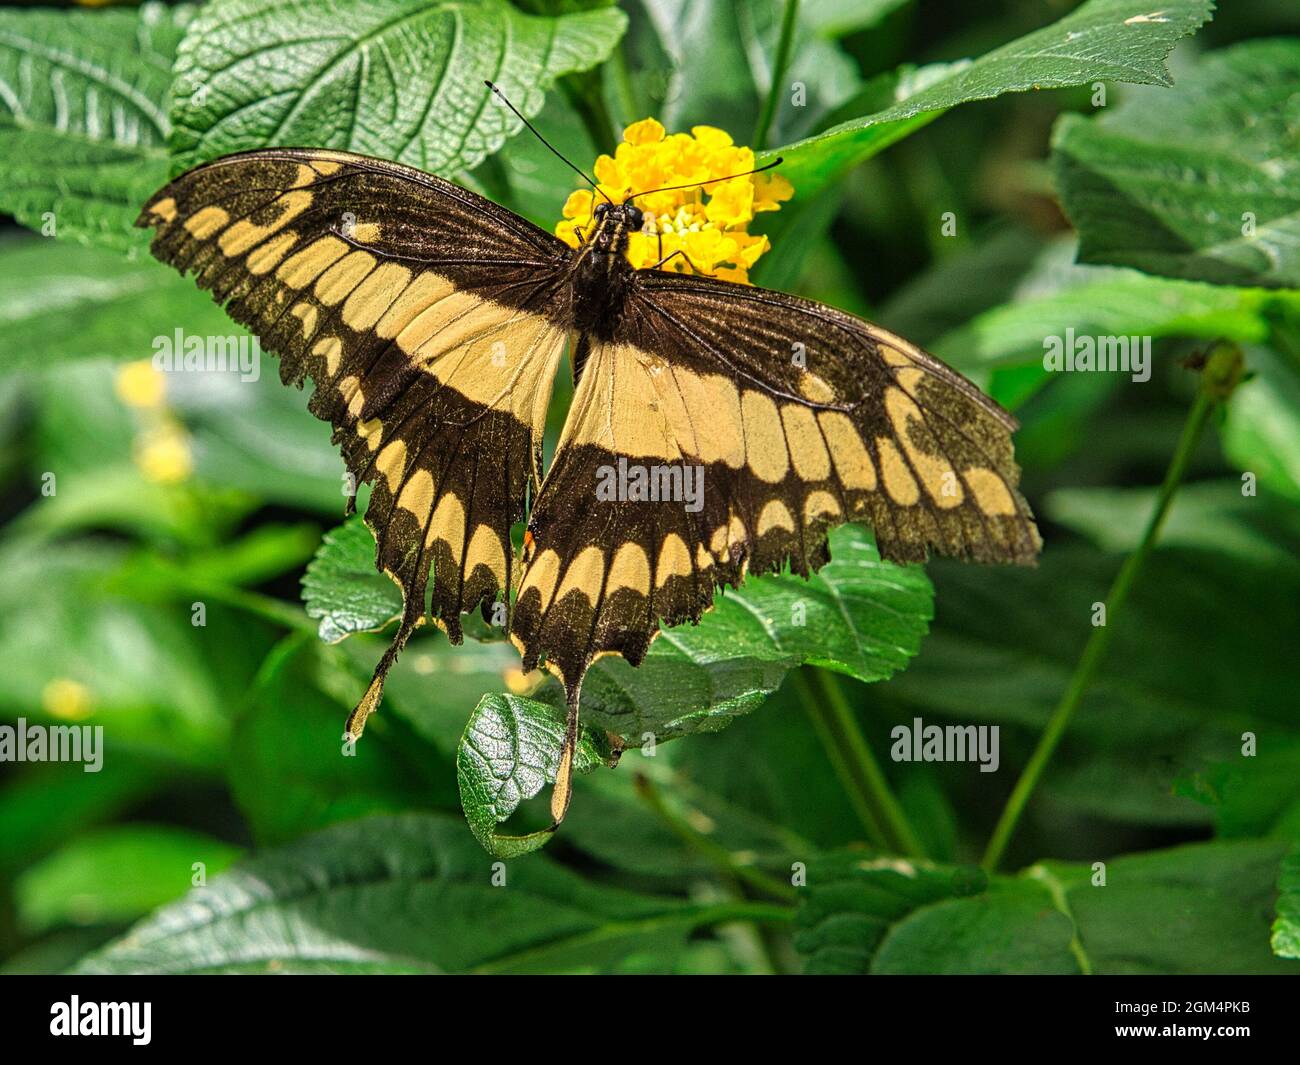 colorful butterfly on a leaf, flower. elegant and delicate. colorful, fragile, and dreamlike beauty Stock Photo